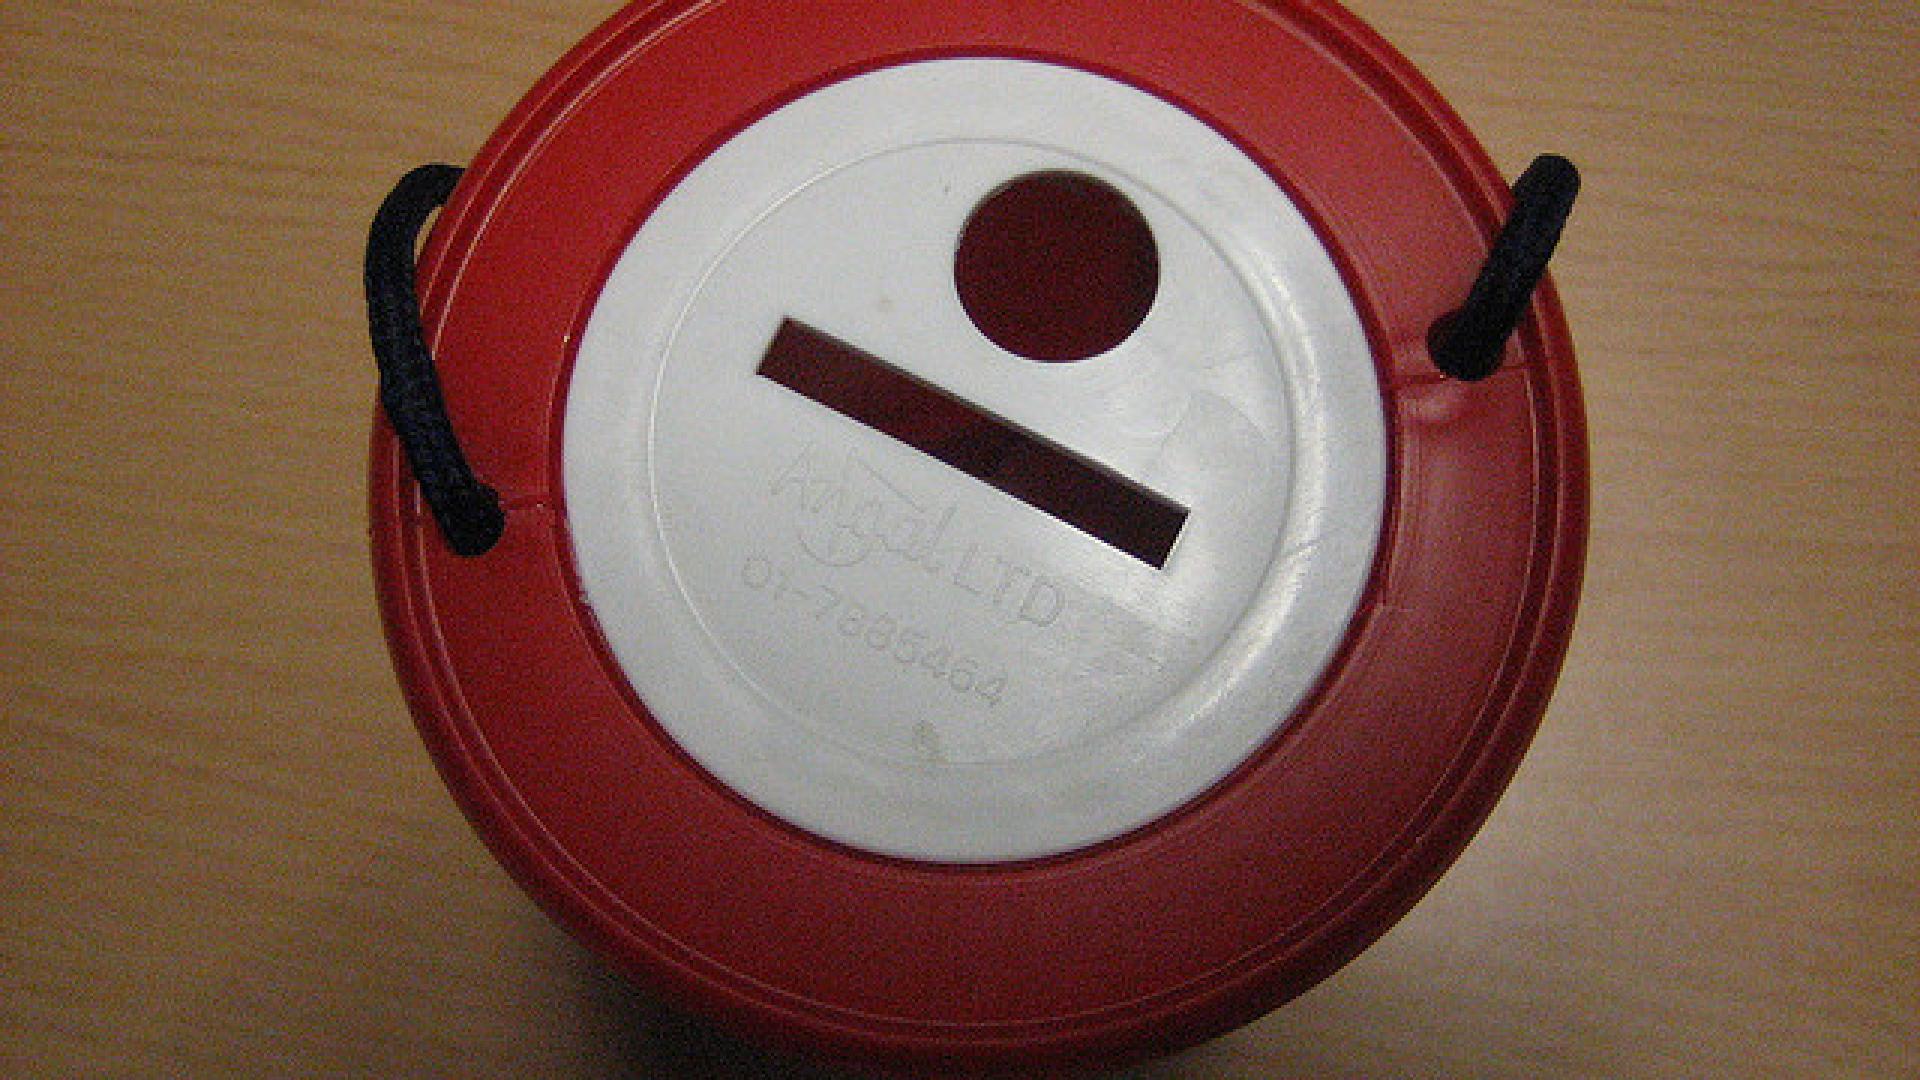 Aerial view of a charity collection box